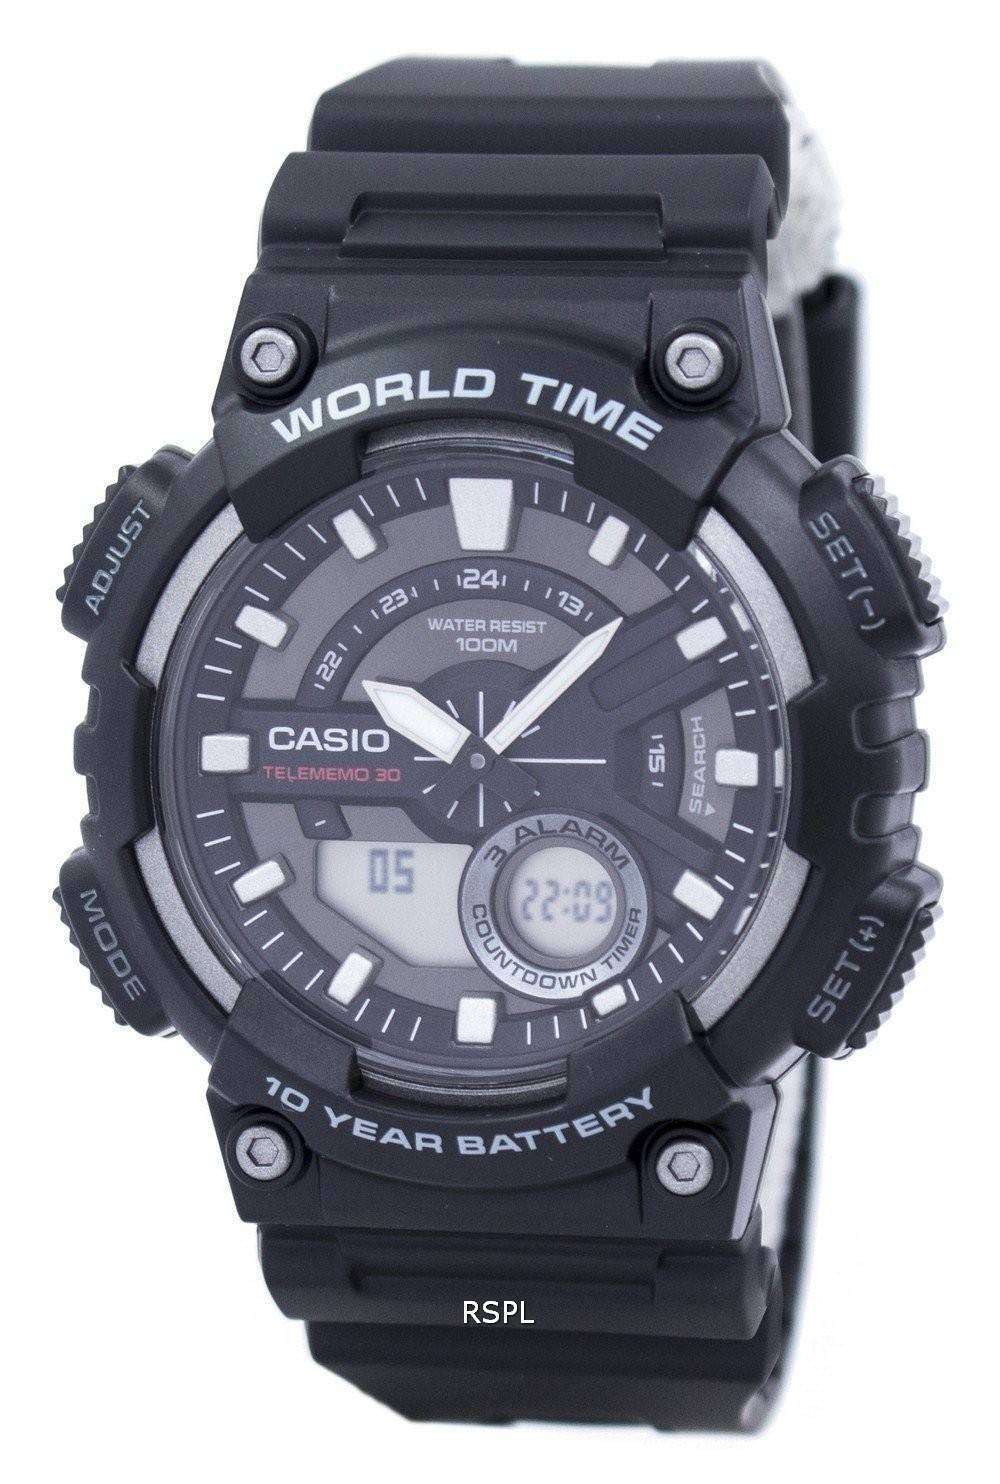 how to set digital time on casio telememo 30